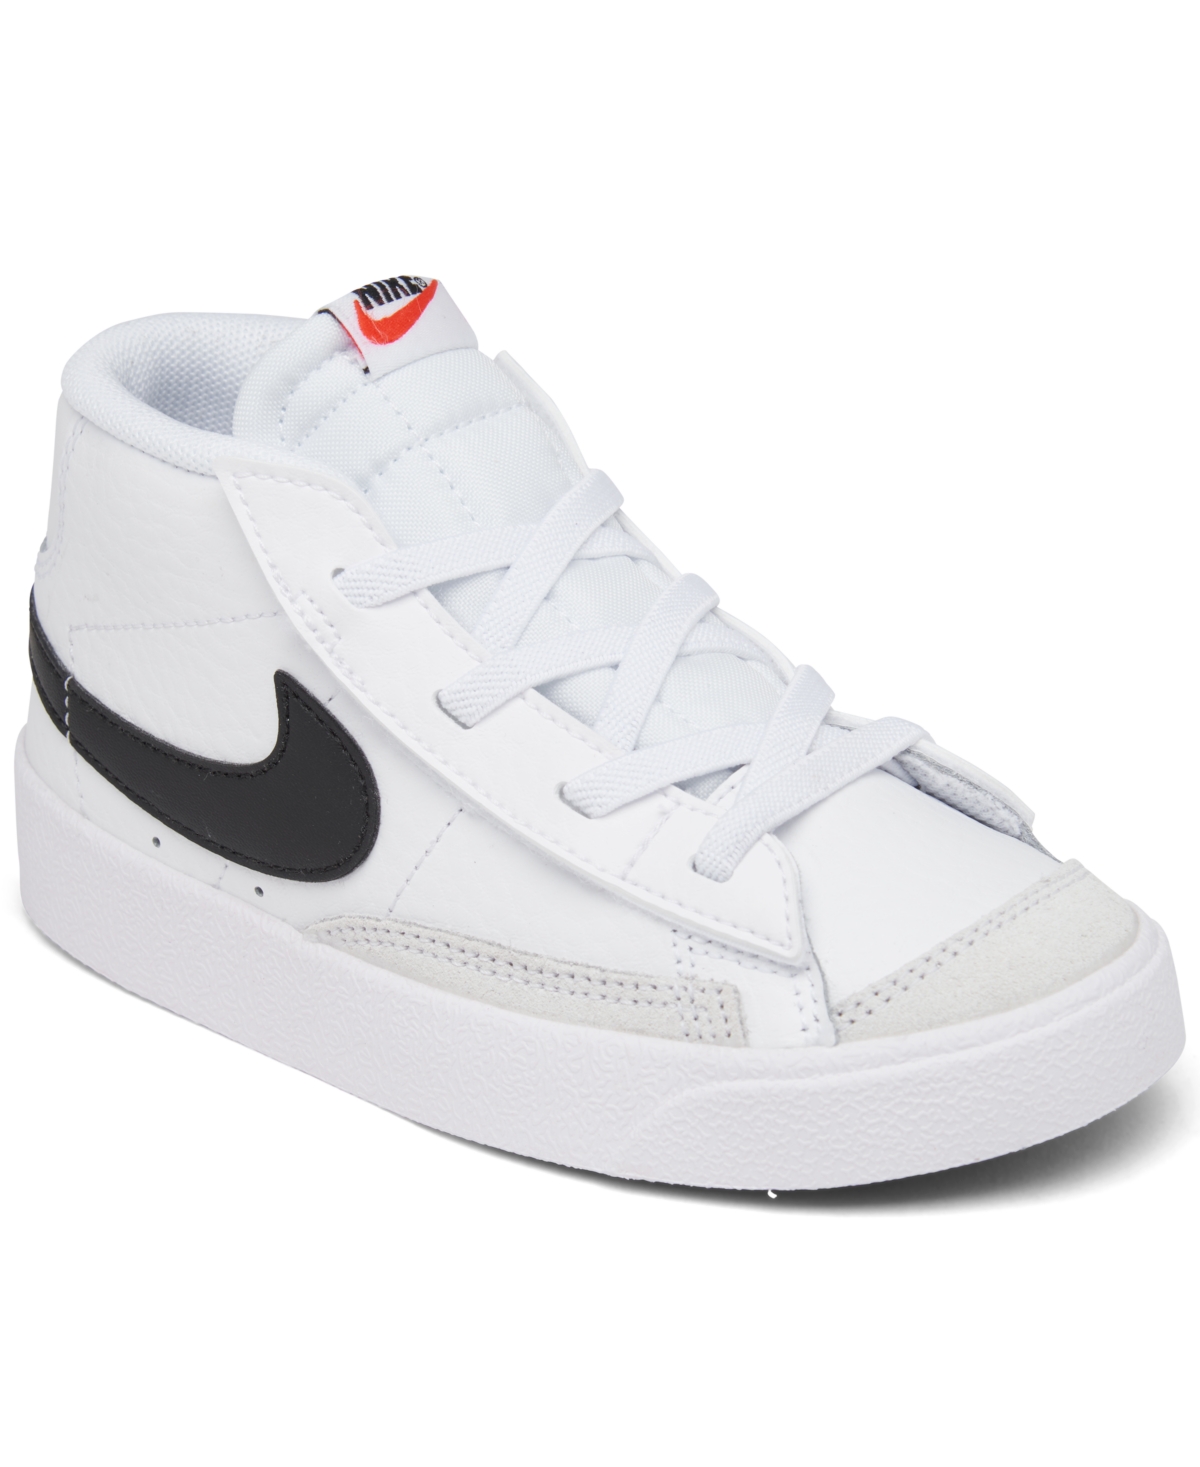 Nike Babies' Toddler Kids Blazer Mid 77 Casual Sneakers From Finish Line In White,orange,black